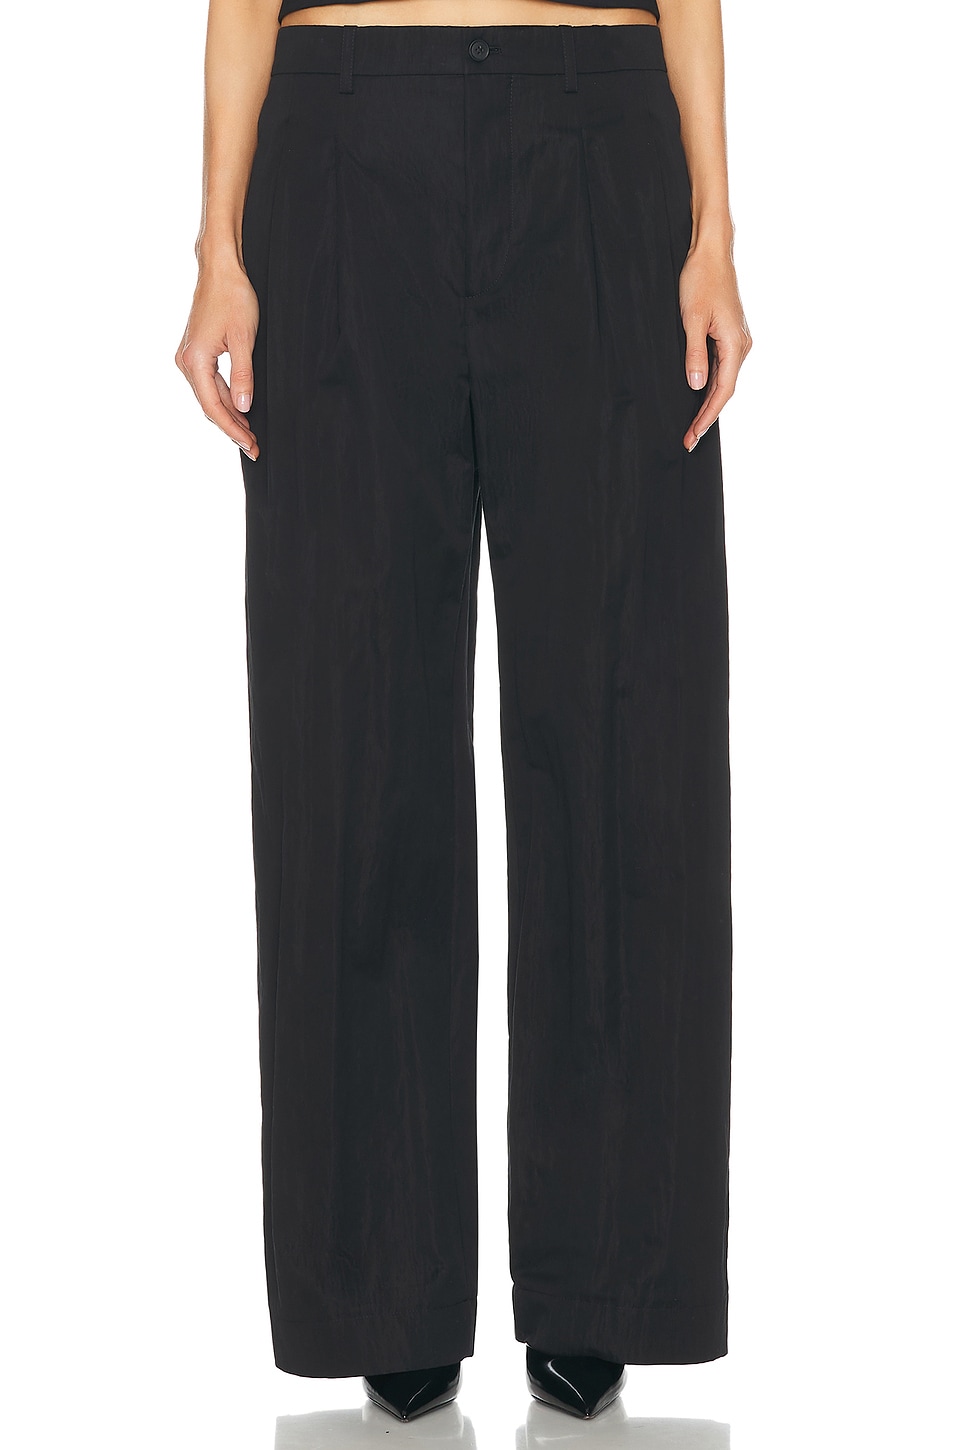 Drill Chino Pant in Black